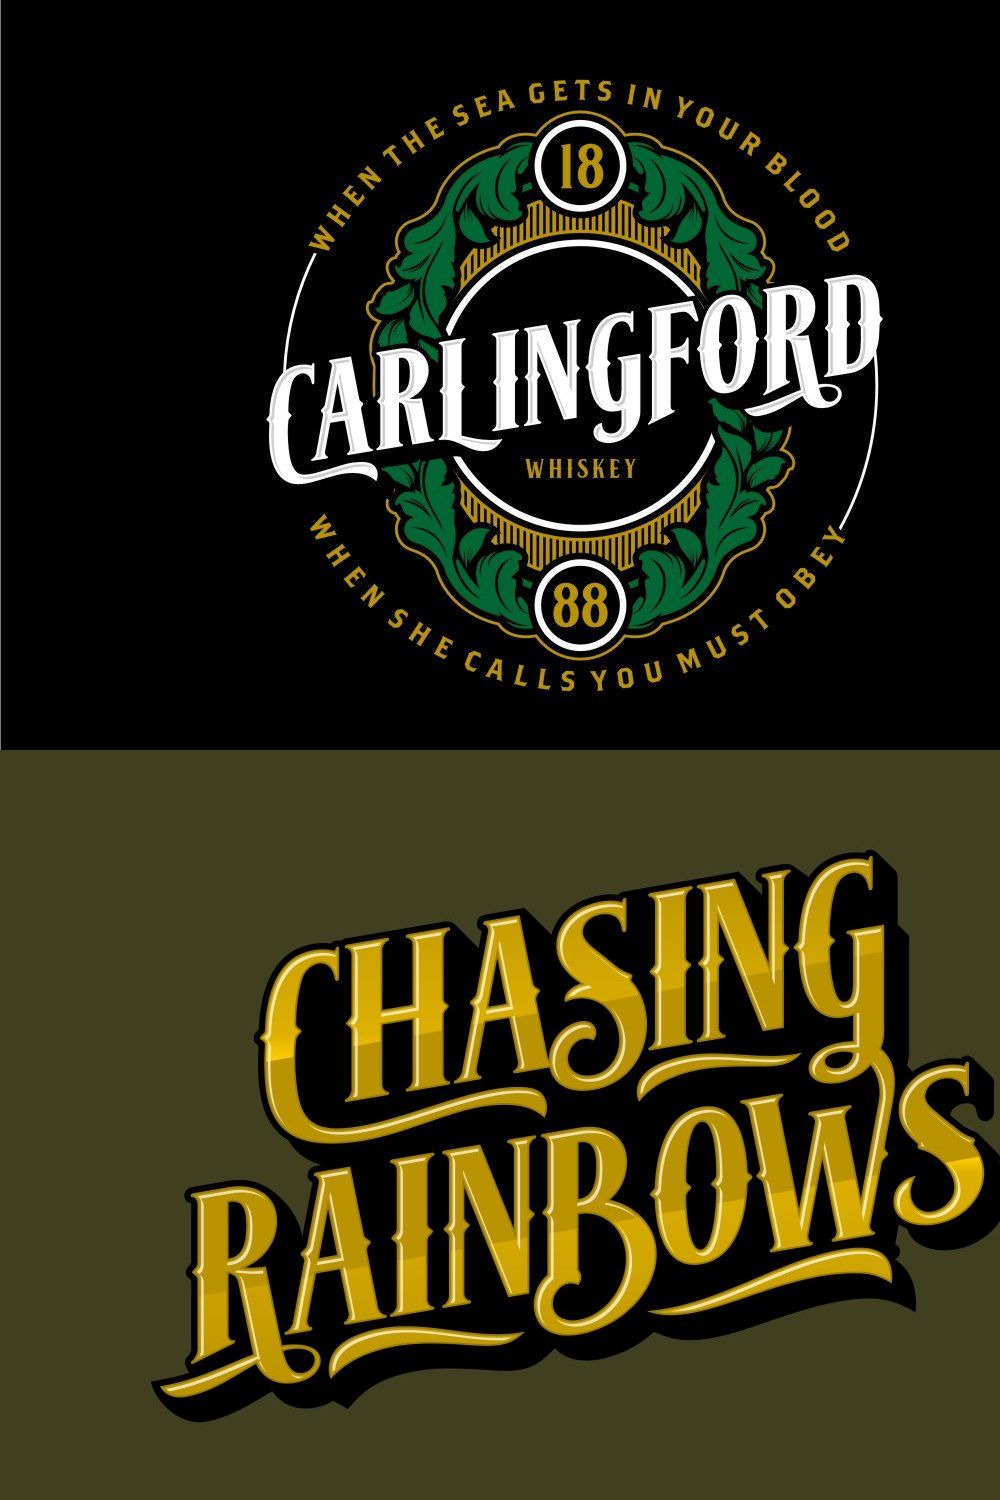 Carlingford pinterest preview image.